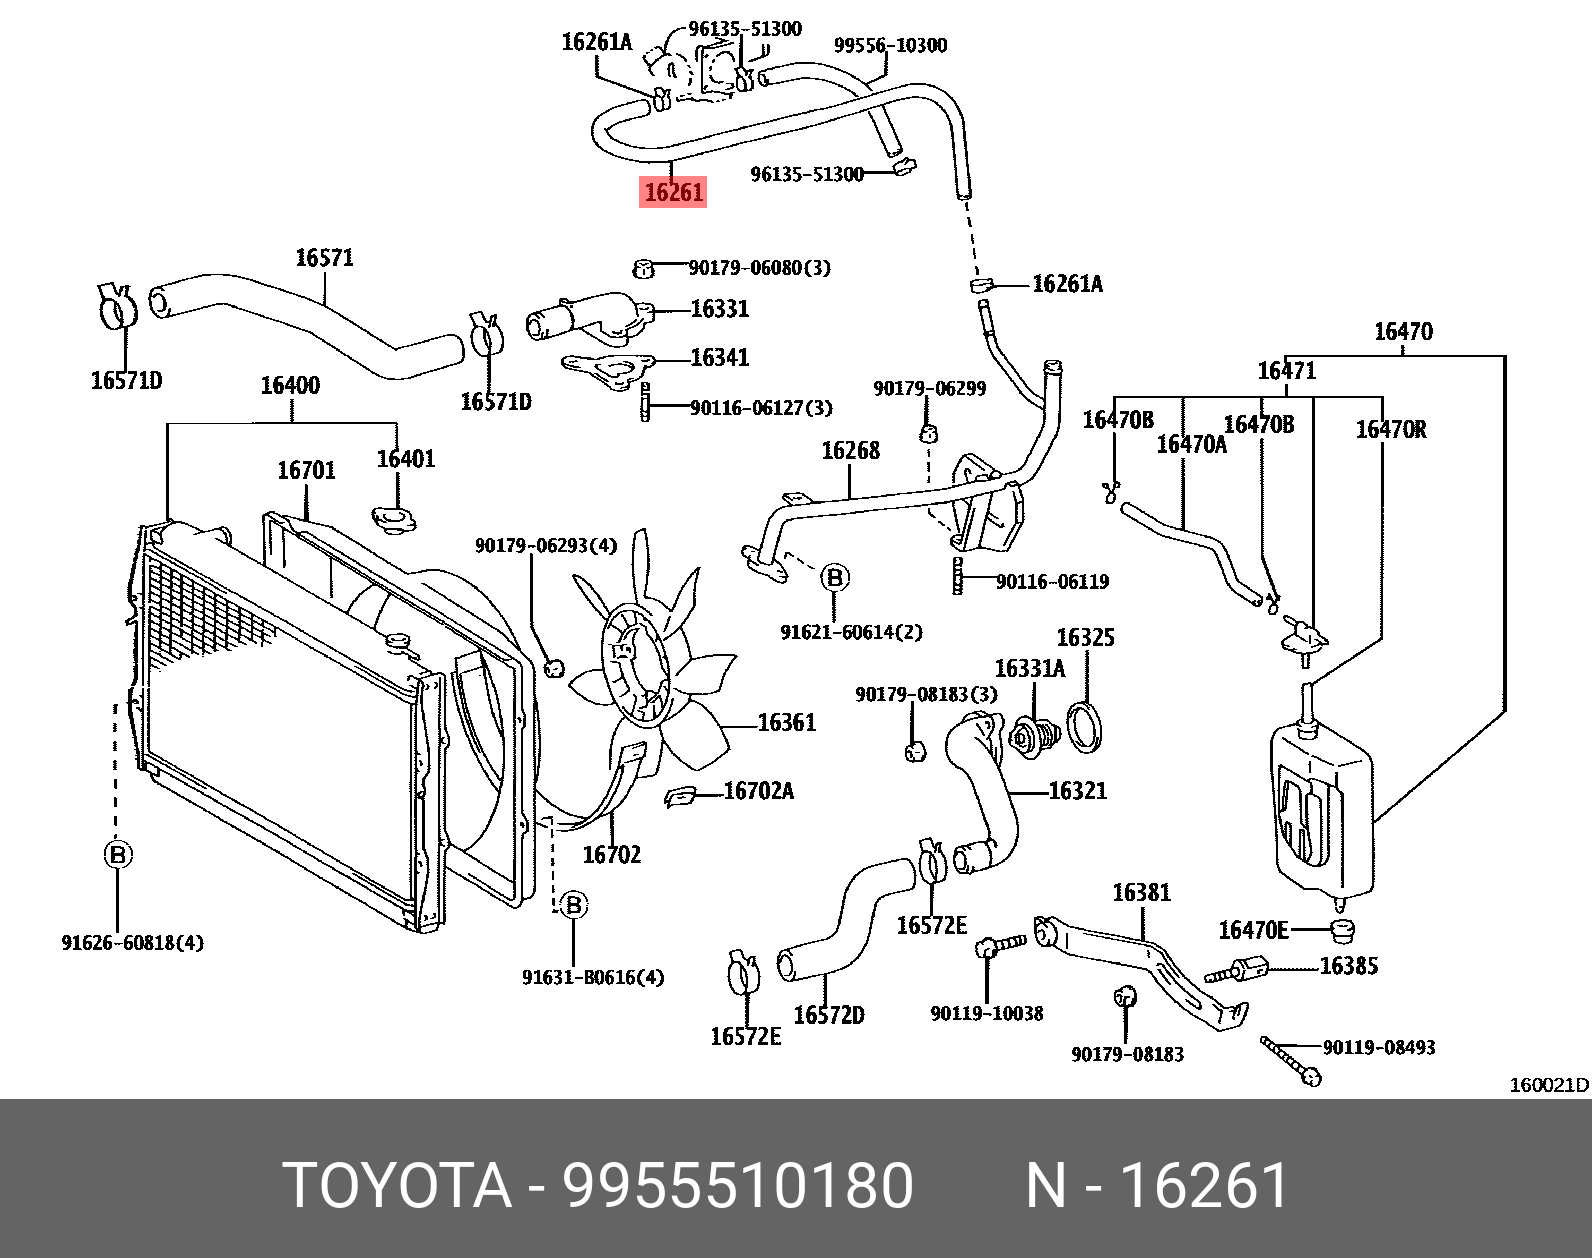 COROLLA LEVIN 198705 - 199106, HOSE, WATER BY-PASS, NO.3